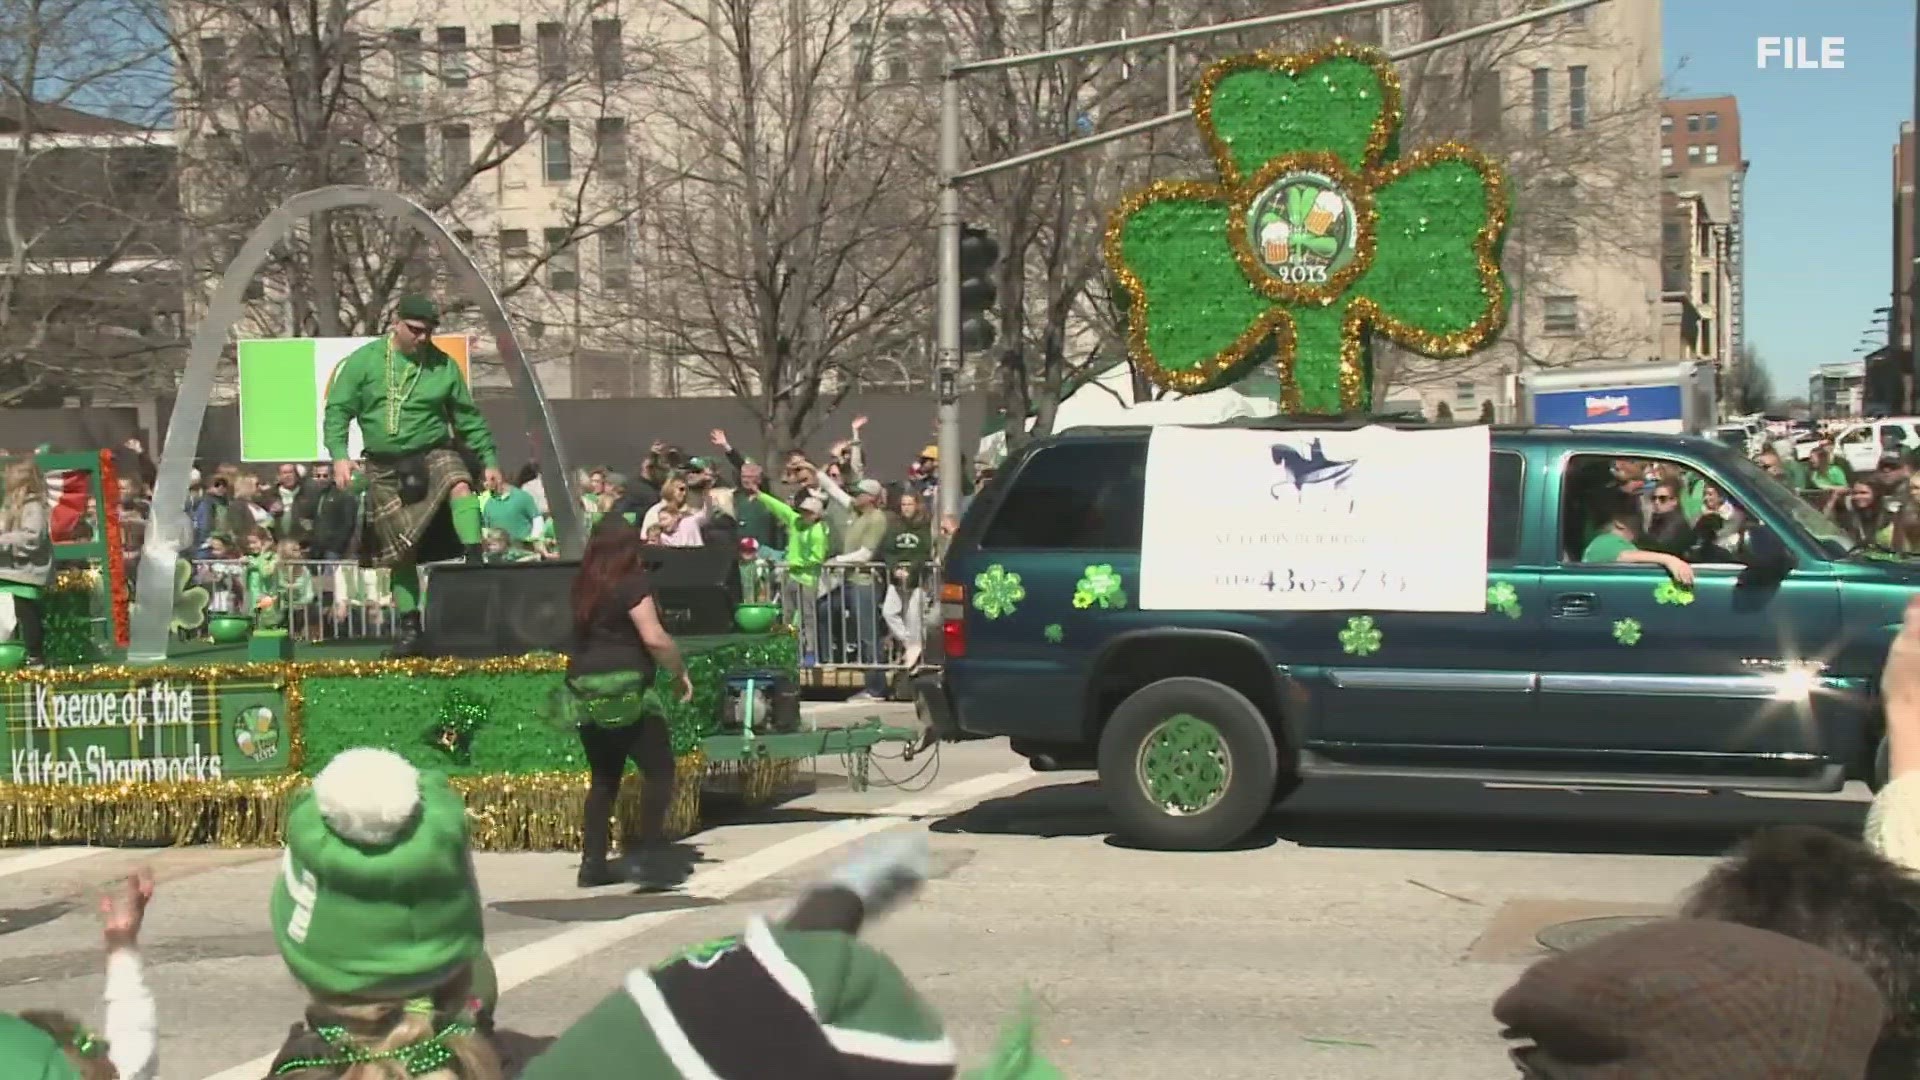 With the St. Patrick's Day Parade on Saturday and a Battlehawks game Sunday, hundreds of thousands of people will be downtown. Here's how police are preparing.